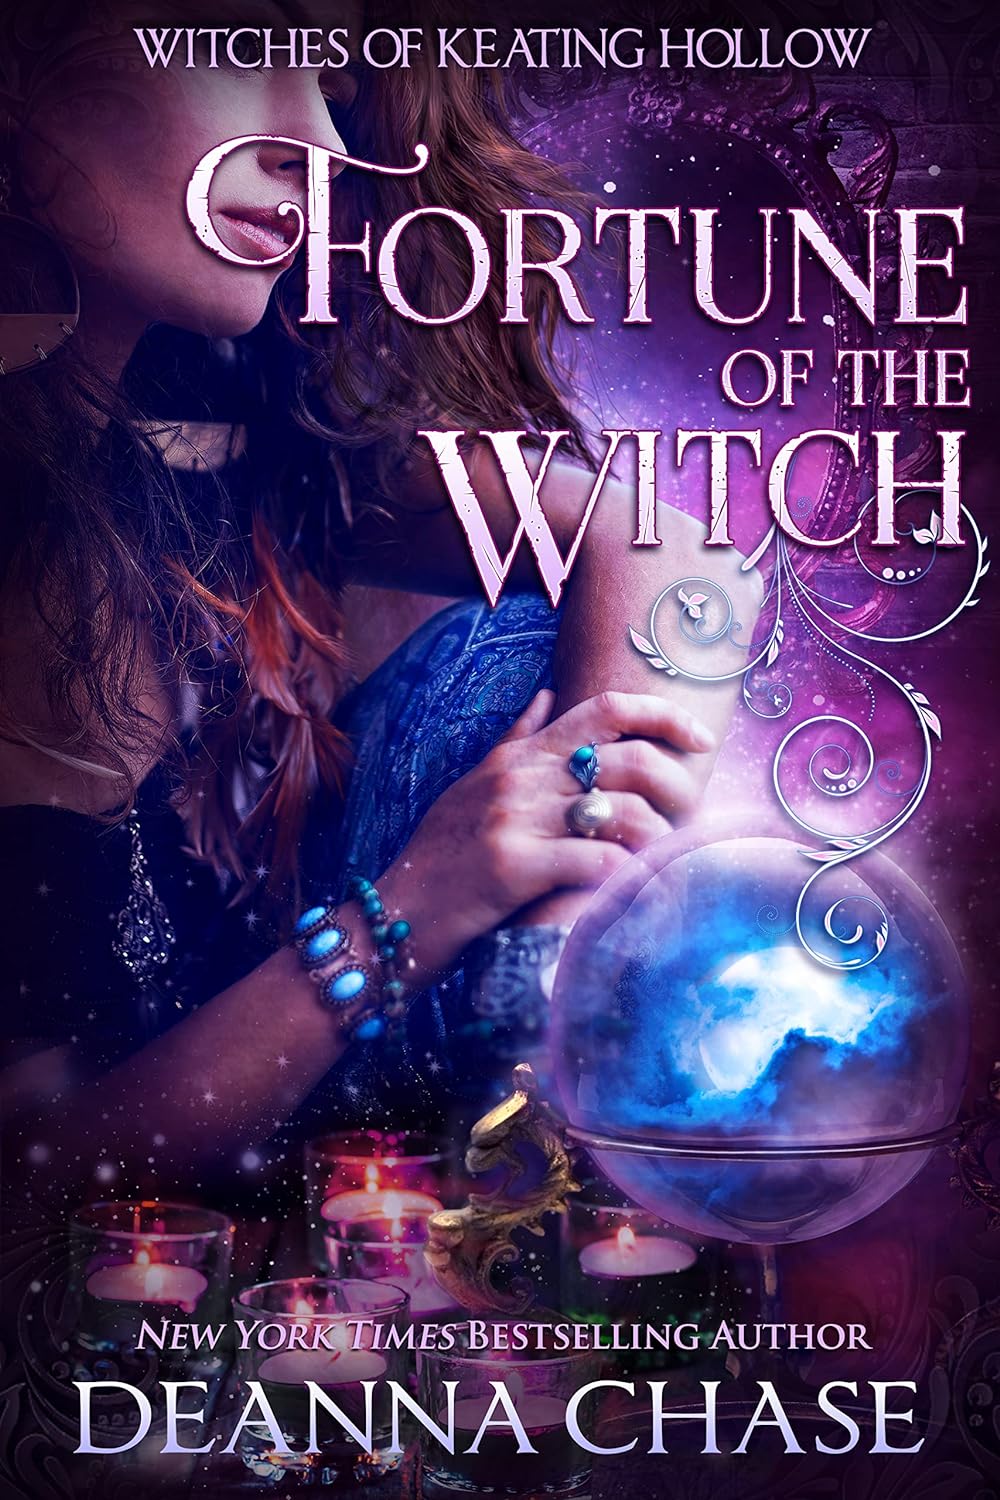 Fortune of the Witch by Deanna Chase